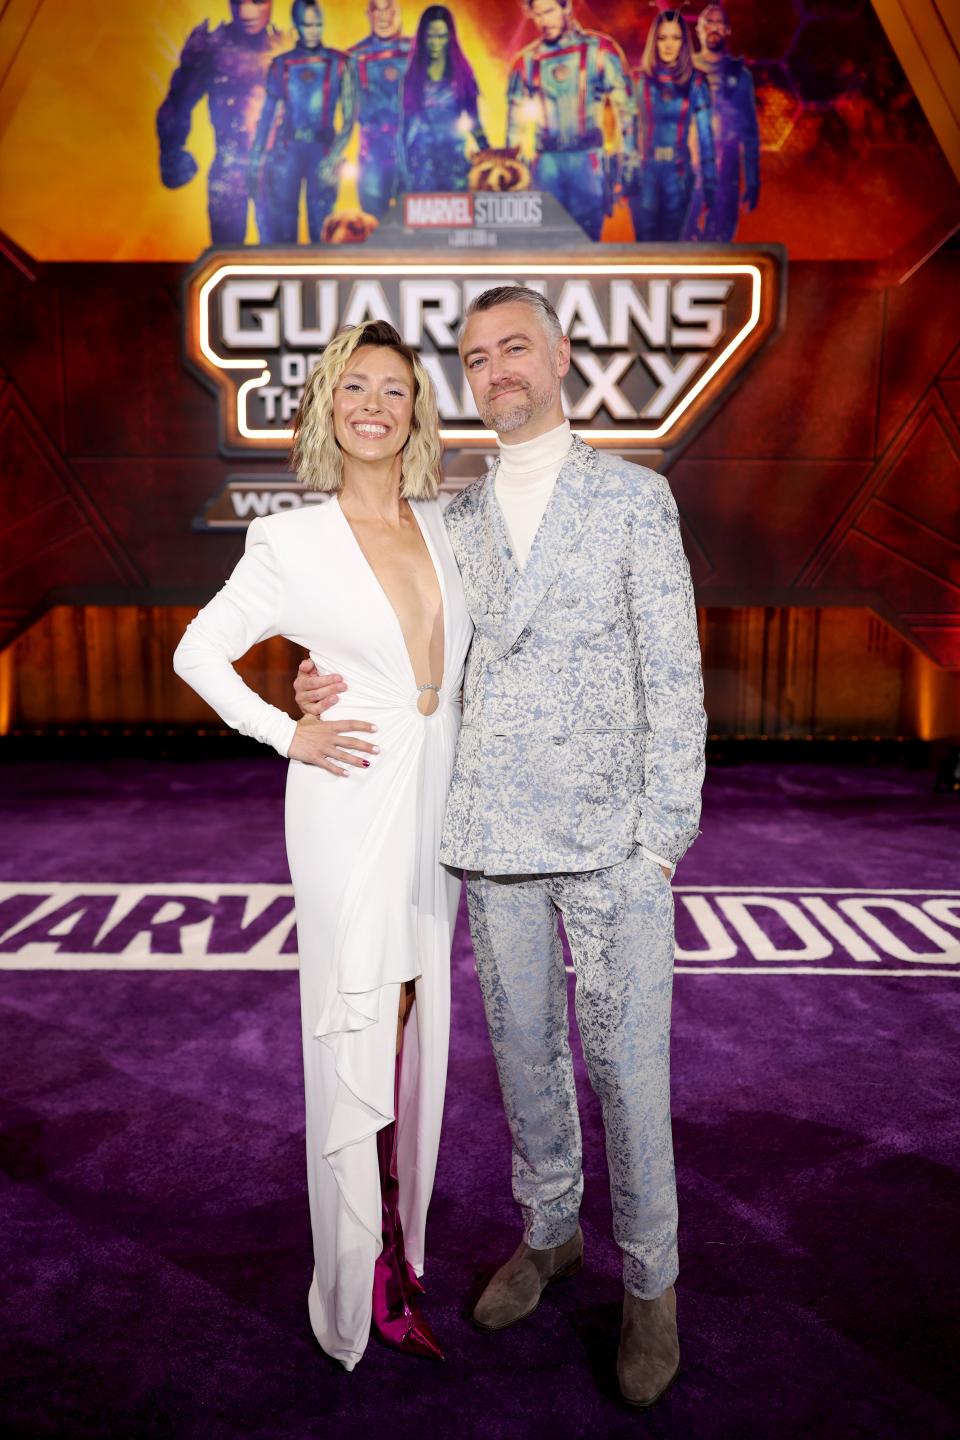 Natasha Halevi and Sean Gunn attend the Guardians of the Galaxy Vol. 3 World Premiere at the Dolby Theatre in Hollywood, California on April 27, 2023.